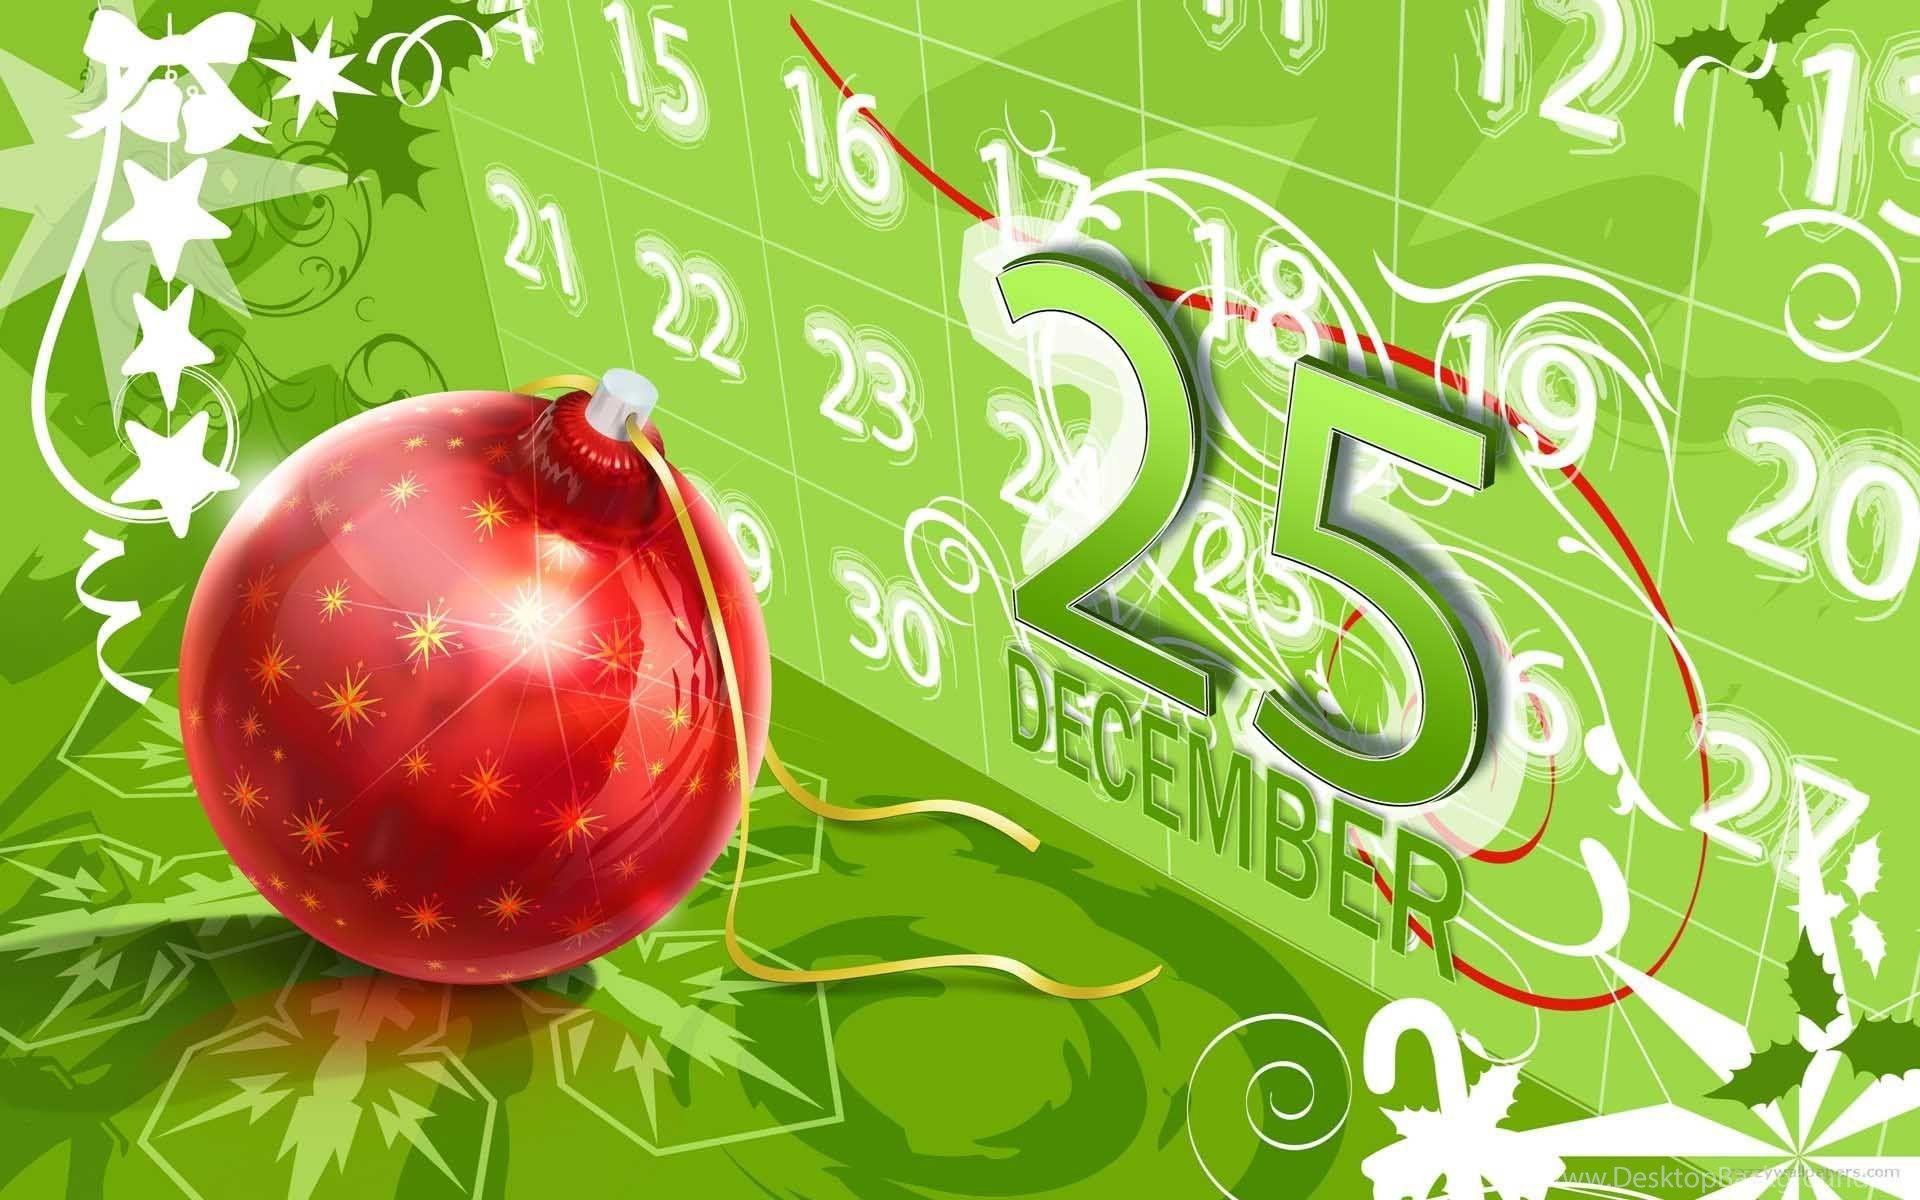 Christmas Countdown Wallpaper Started For 2015 In HD Desktop Background